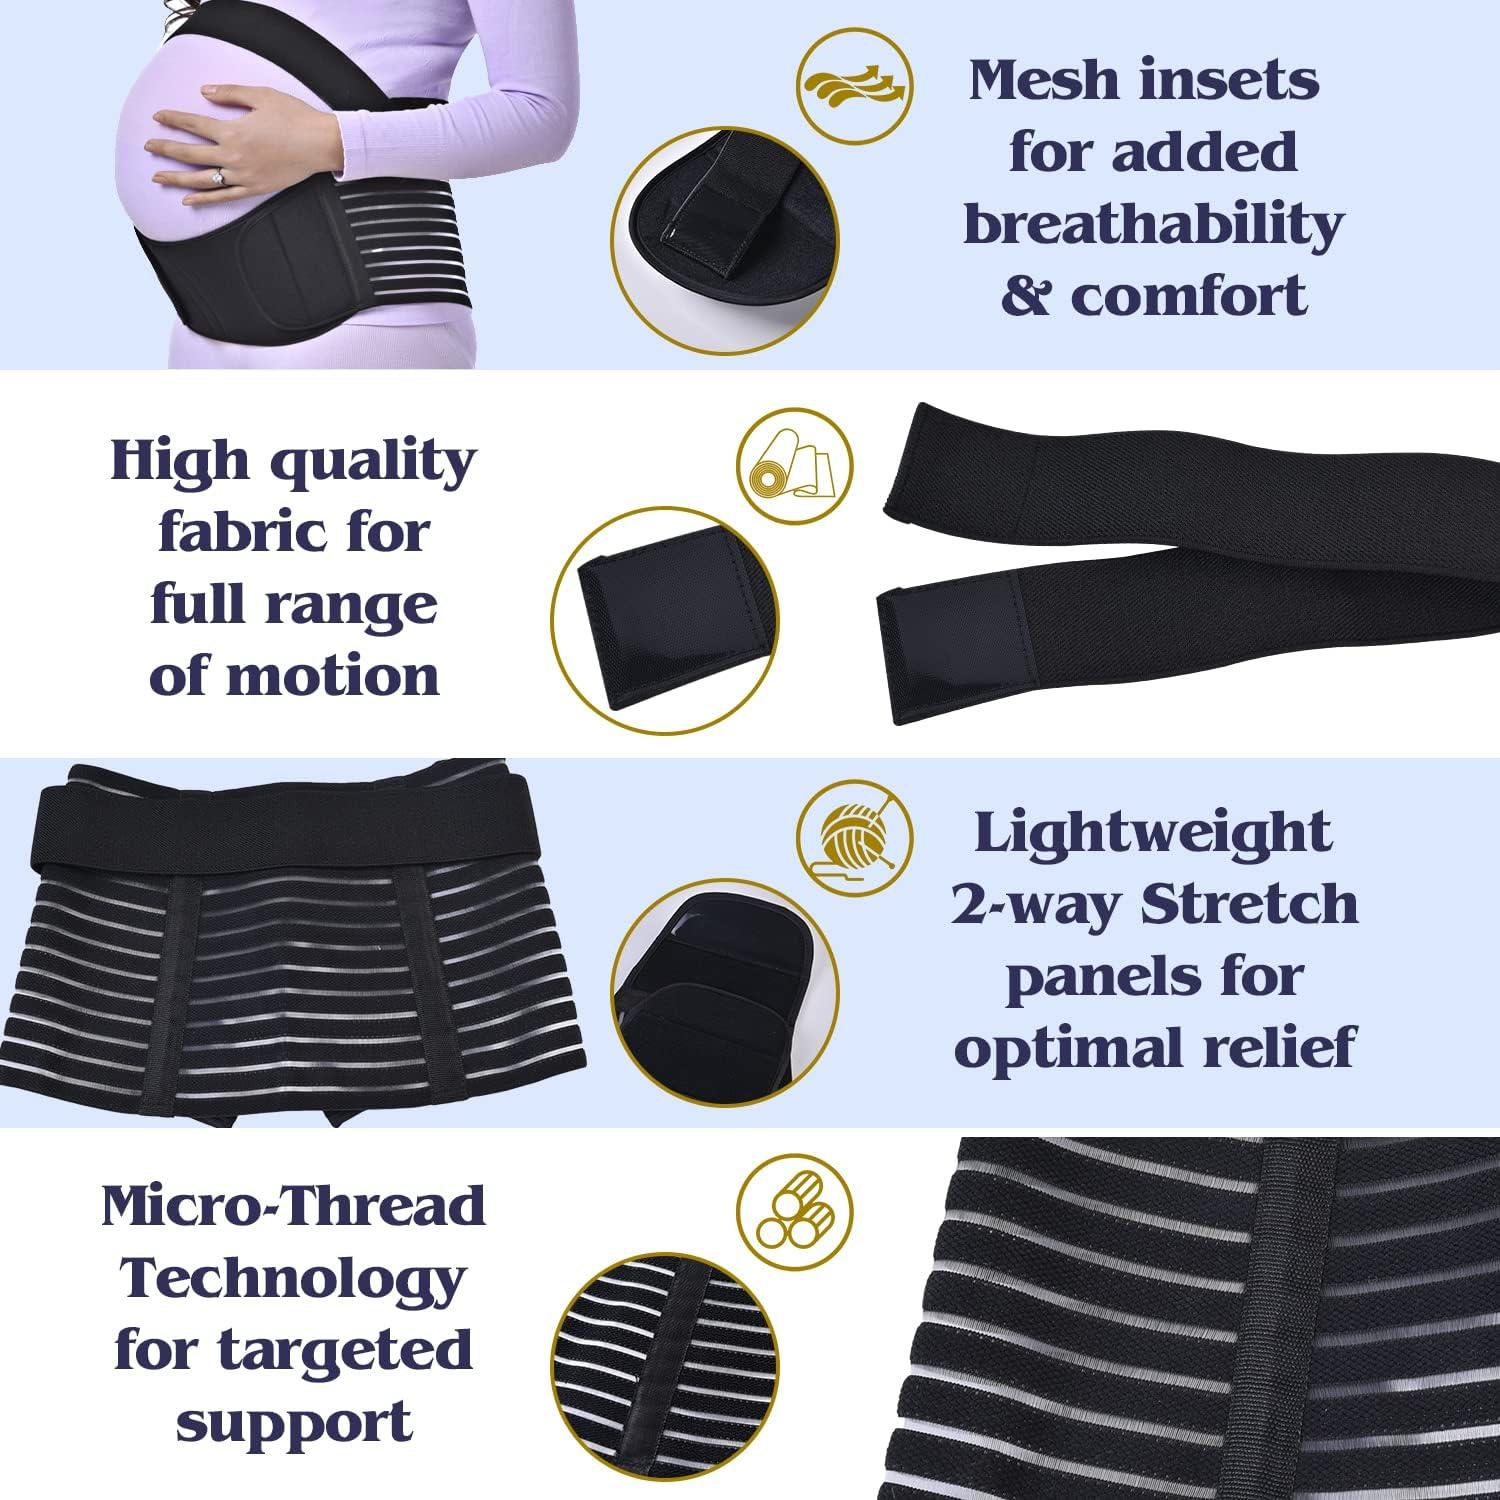 Merlinae Pregnancy Support Belt Maternity - Care Breathable Abdomen Support  and Pelvic Support - Comfortable Belly Band for Pregnancy - Prenatal Cradle  for Baby -Size L Black L ( 90-120CM )